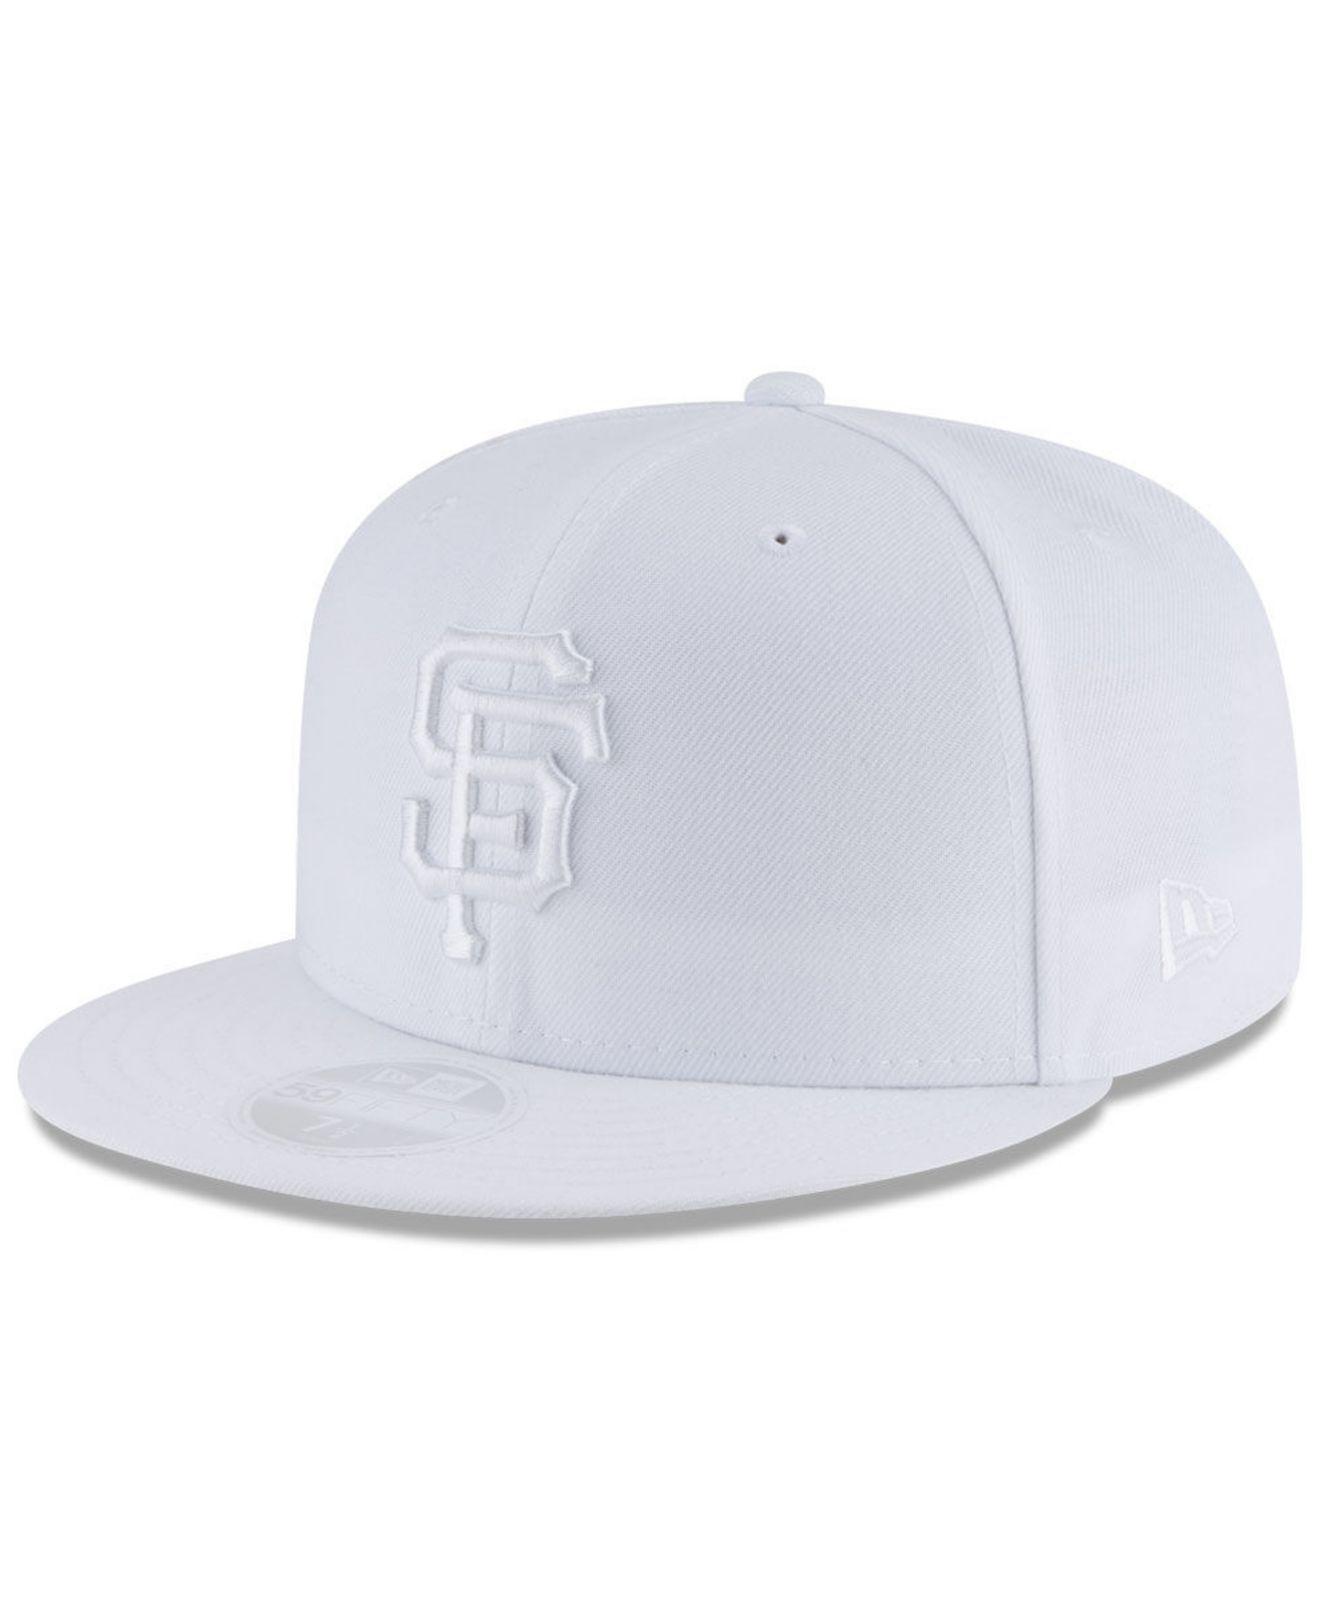 KTZ San Francisco Giants White Out 59fifty Fitted Cap for Men